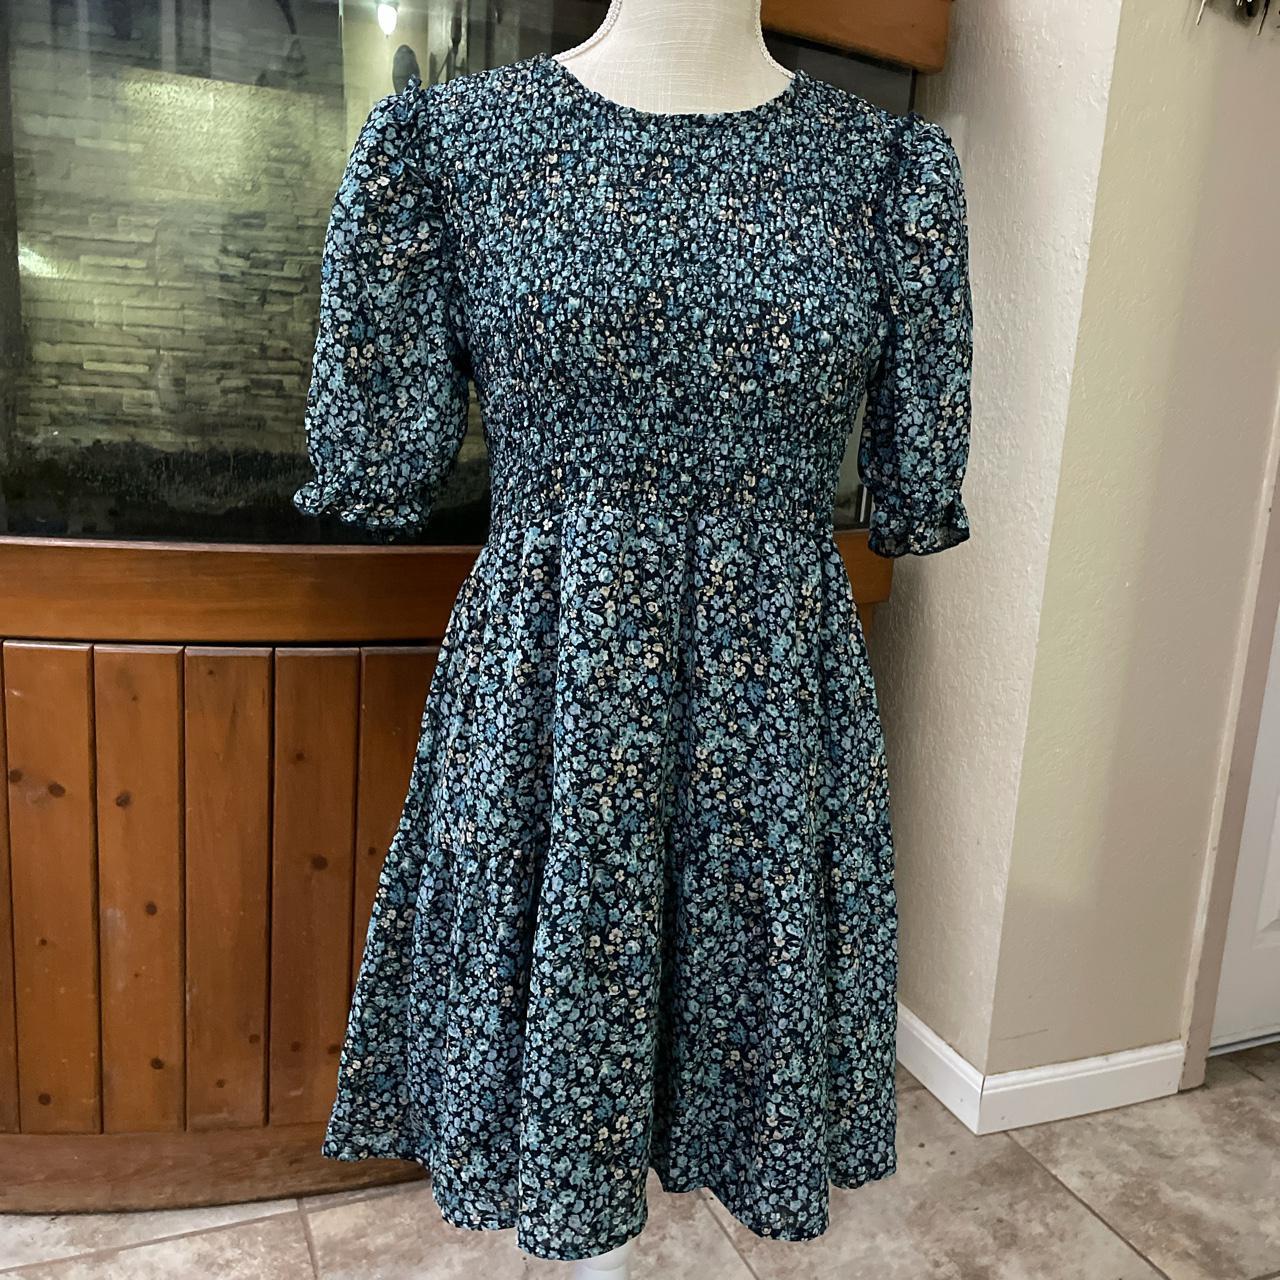 Floral Wild Fable dress! Never worn. Has bubble/puff